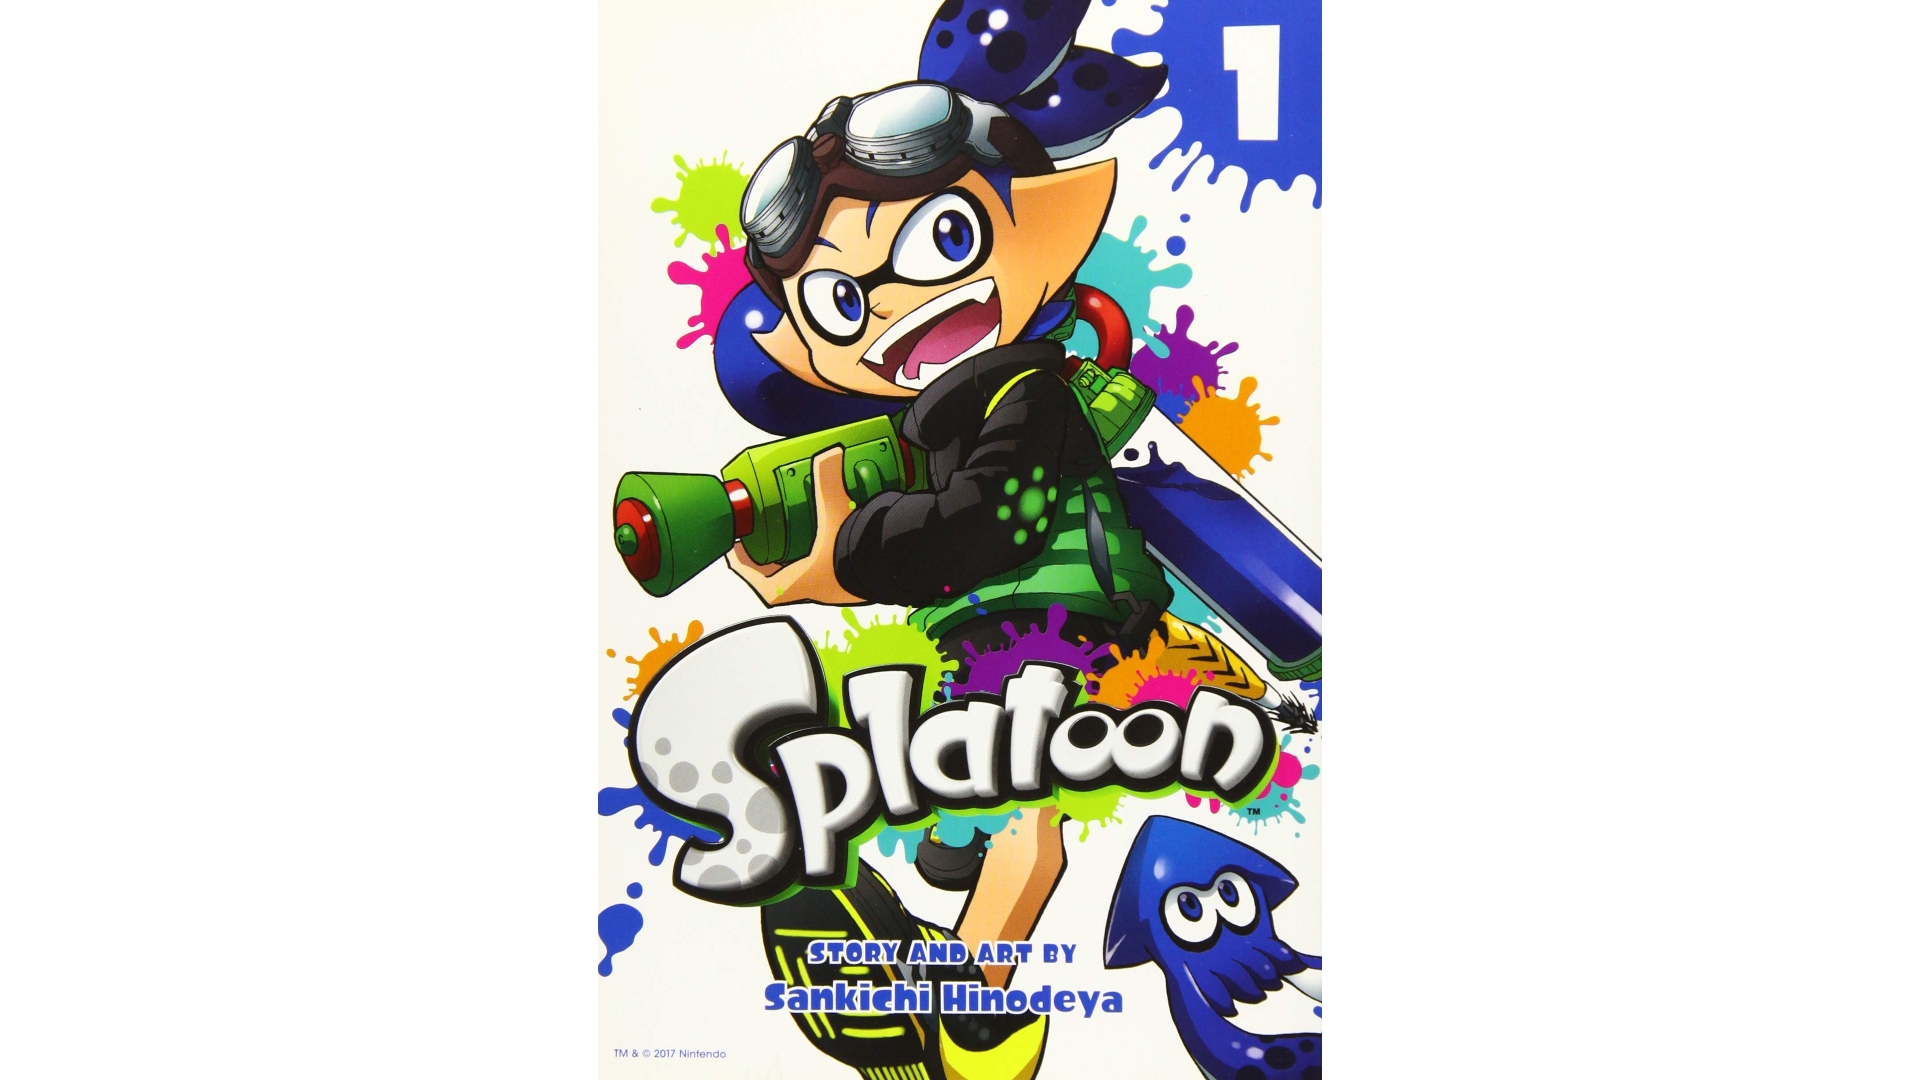 Nintendo gifts: image shows the front cover of the first volume of the Splatoon manga.